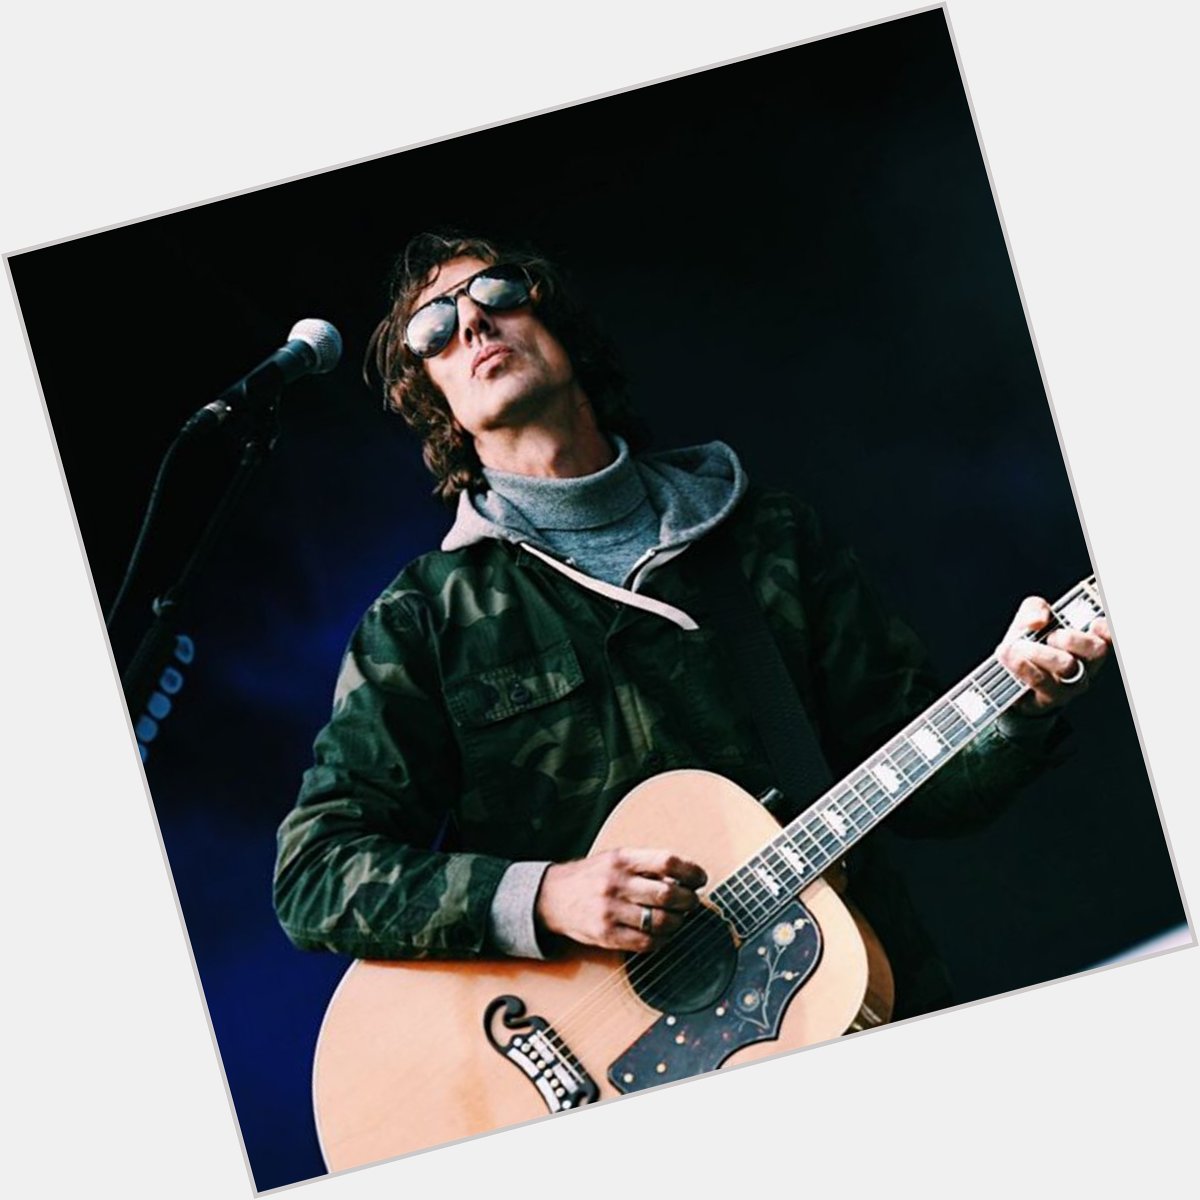 A very happy birthday to the legendary voice behind The Verve, Richard Ashcroft! 